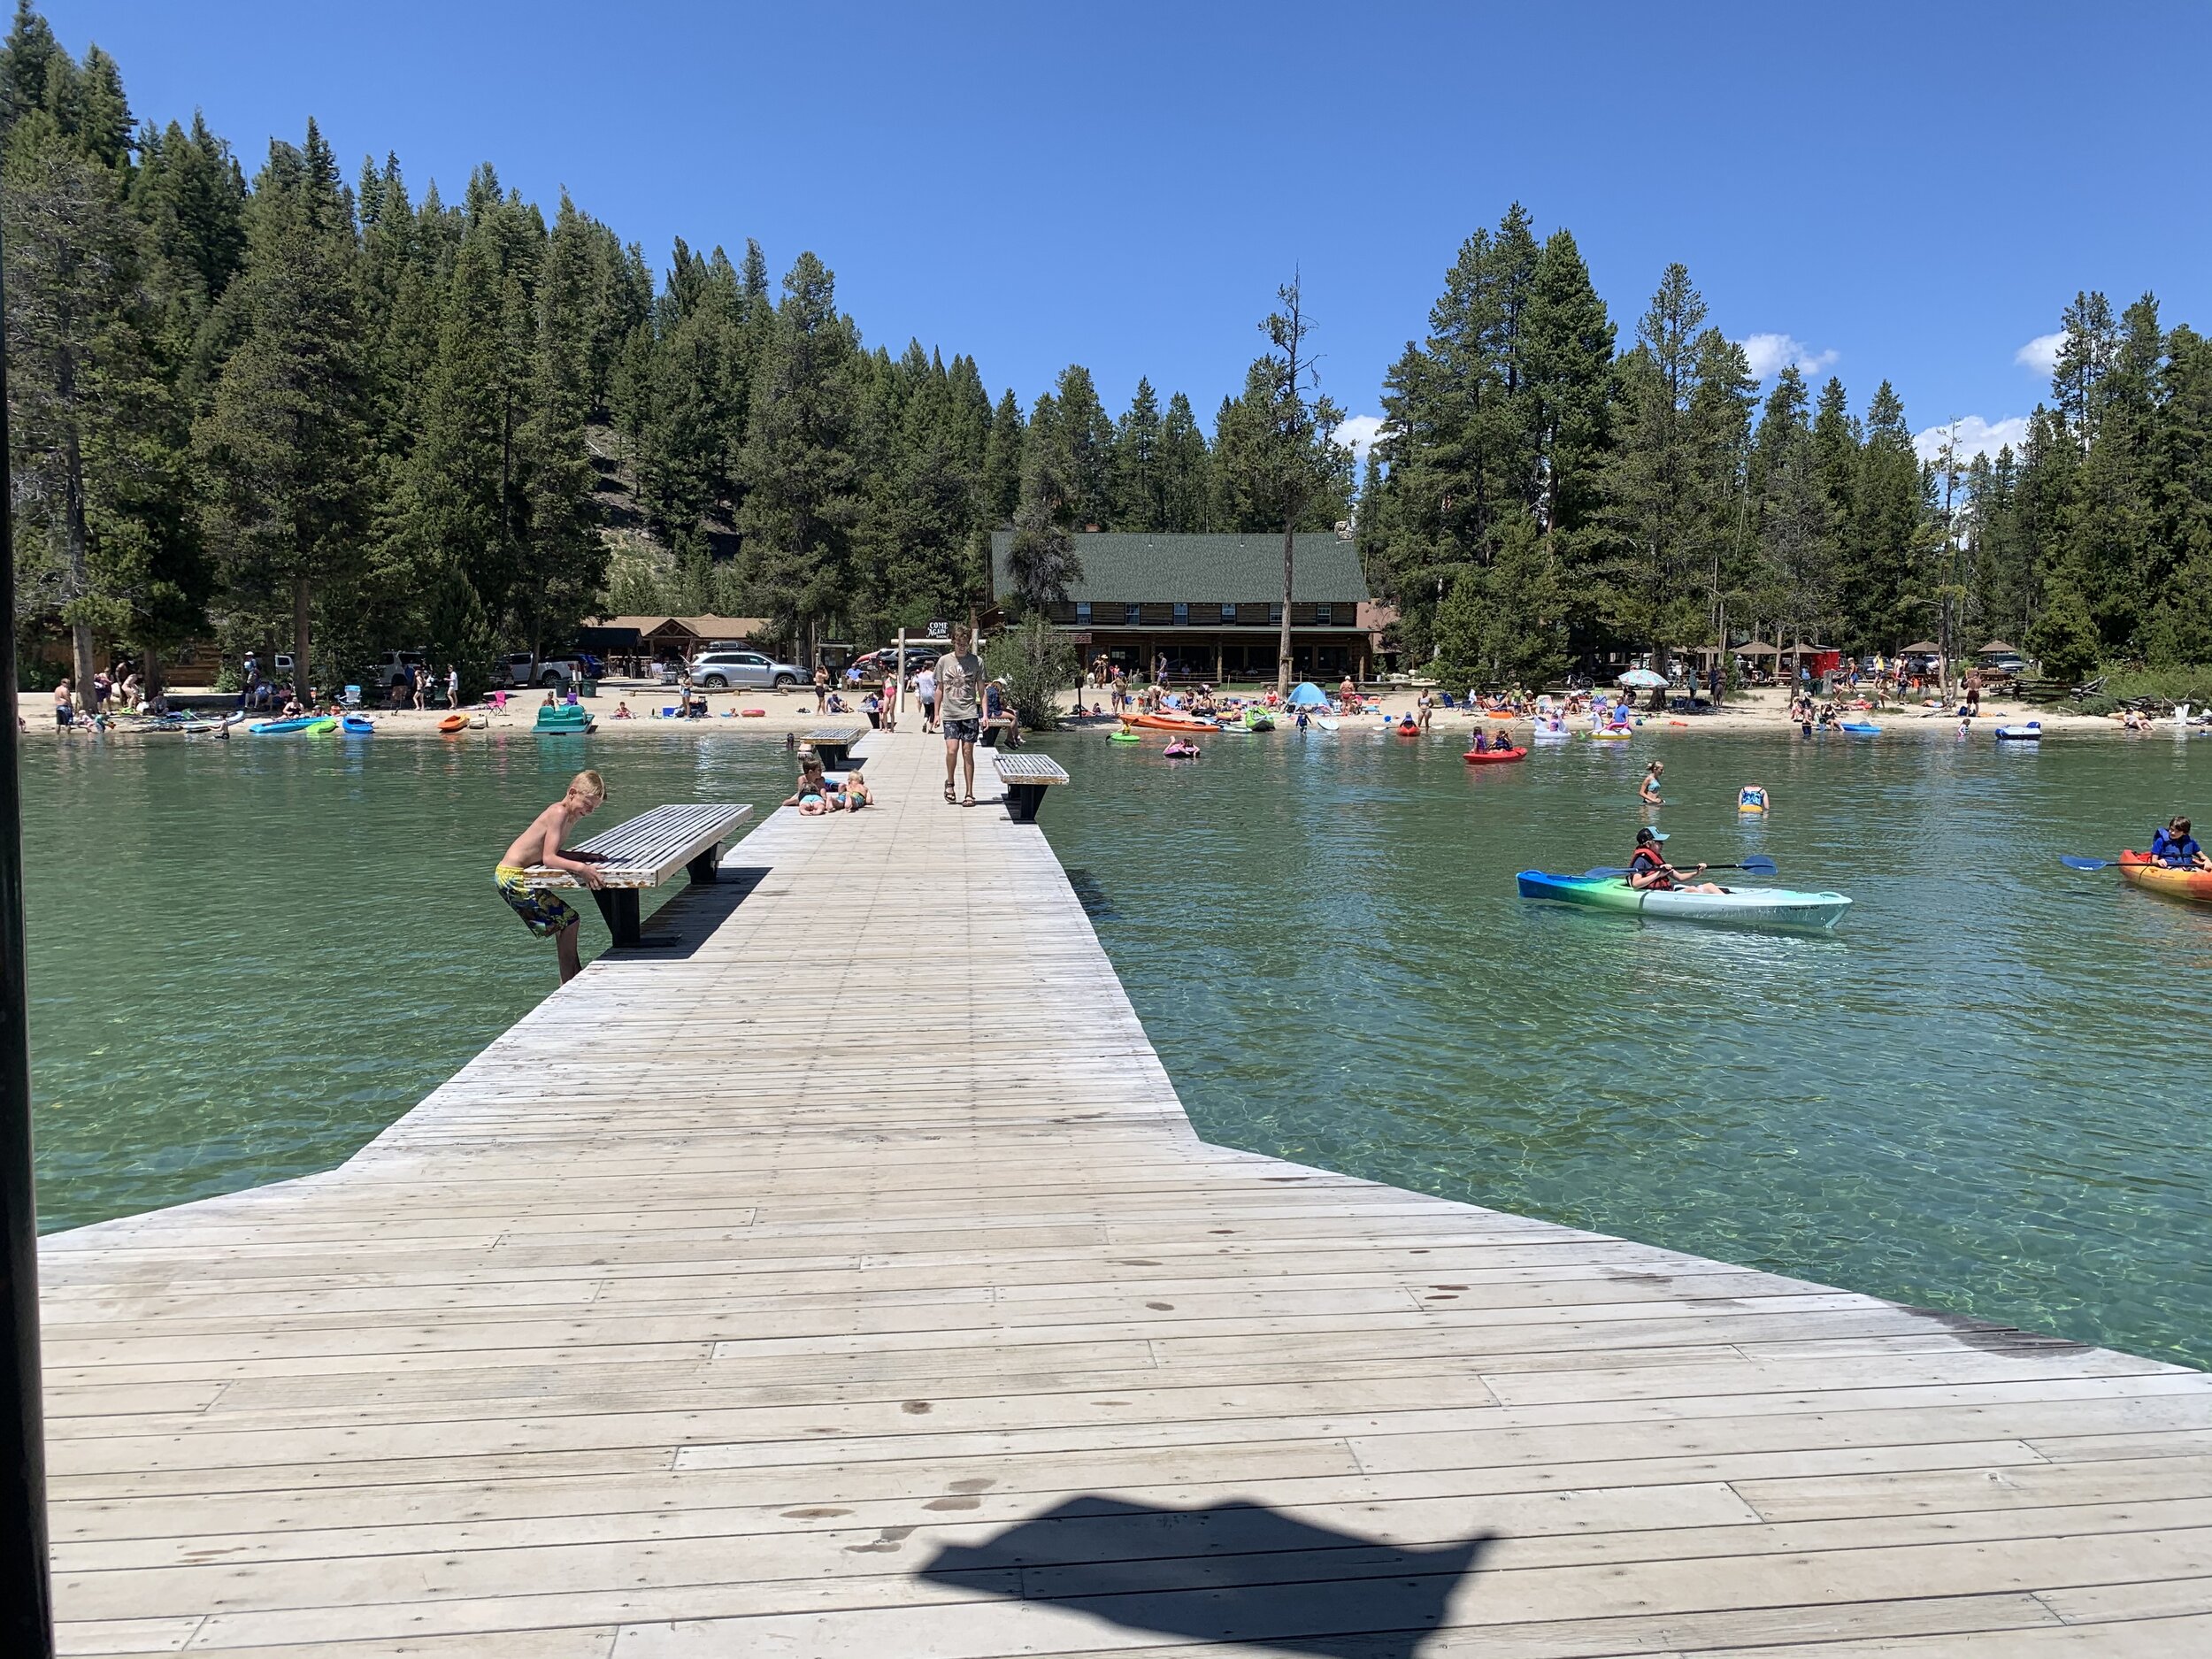  Redfish Lake has mountain lodging, boating, hiking trails and water activities. Until reaching deep waters, you can see to the very bottom through the crystal clear water. This place also had the most pristine dog beach you’ve ever seen! 